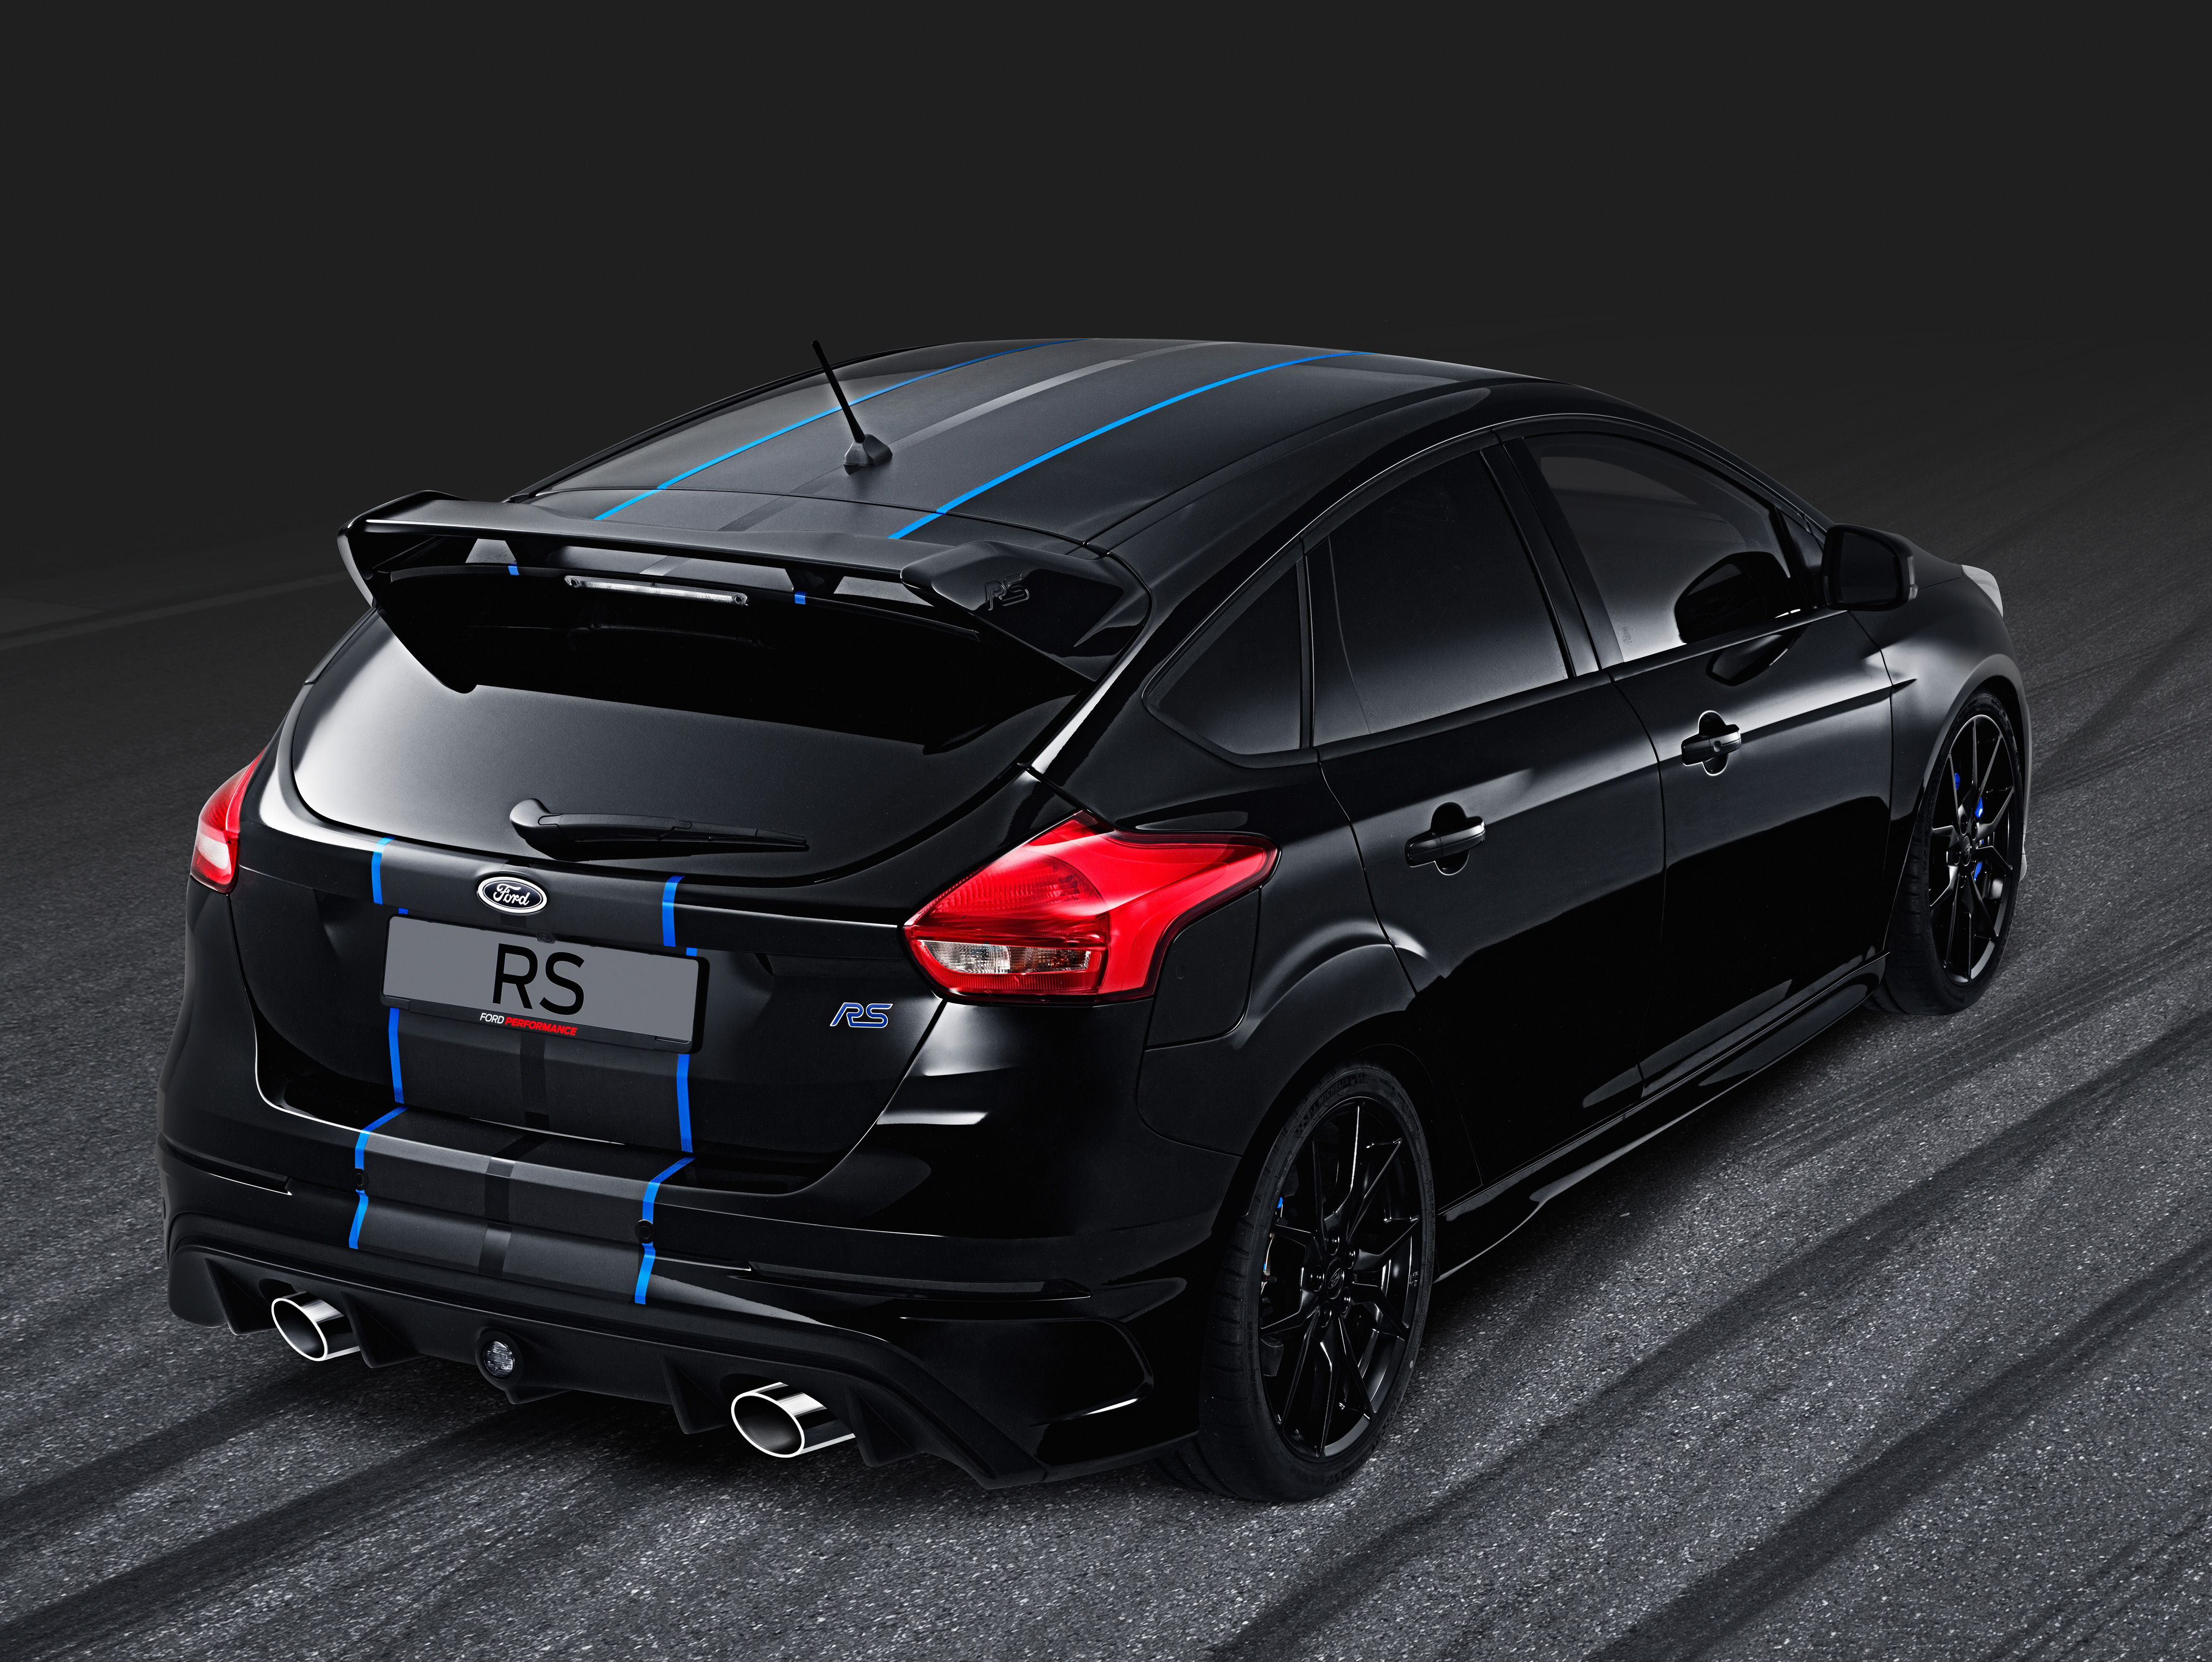 Forms tuning. Ford Focus 3 RS. Ford Focus 2 RS черный. Ford Focus 3 RS Tuning. Форд фокус 3 Рестайлинг RS.